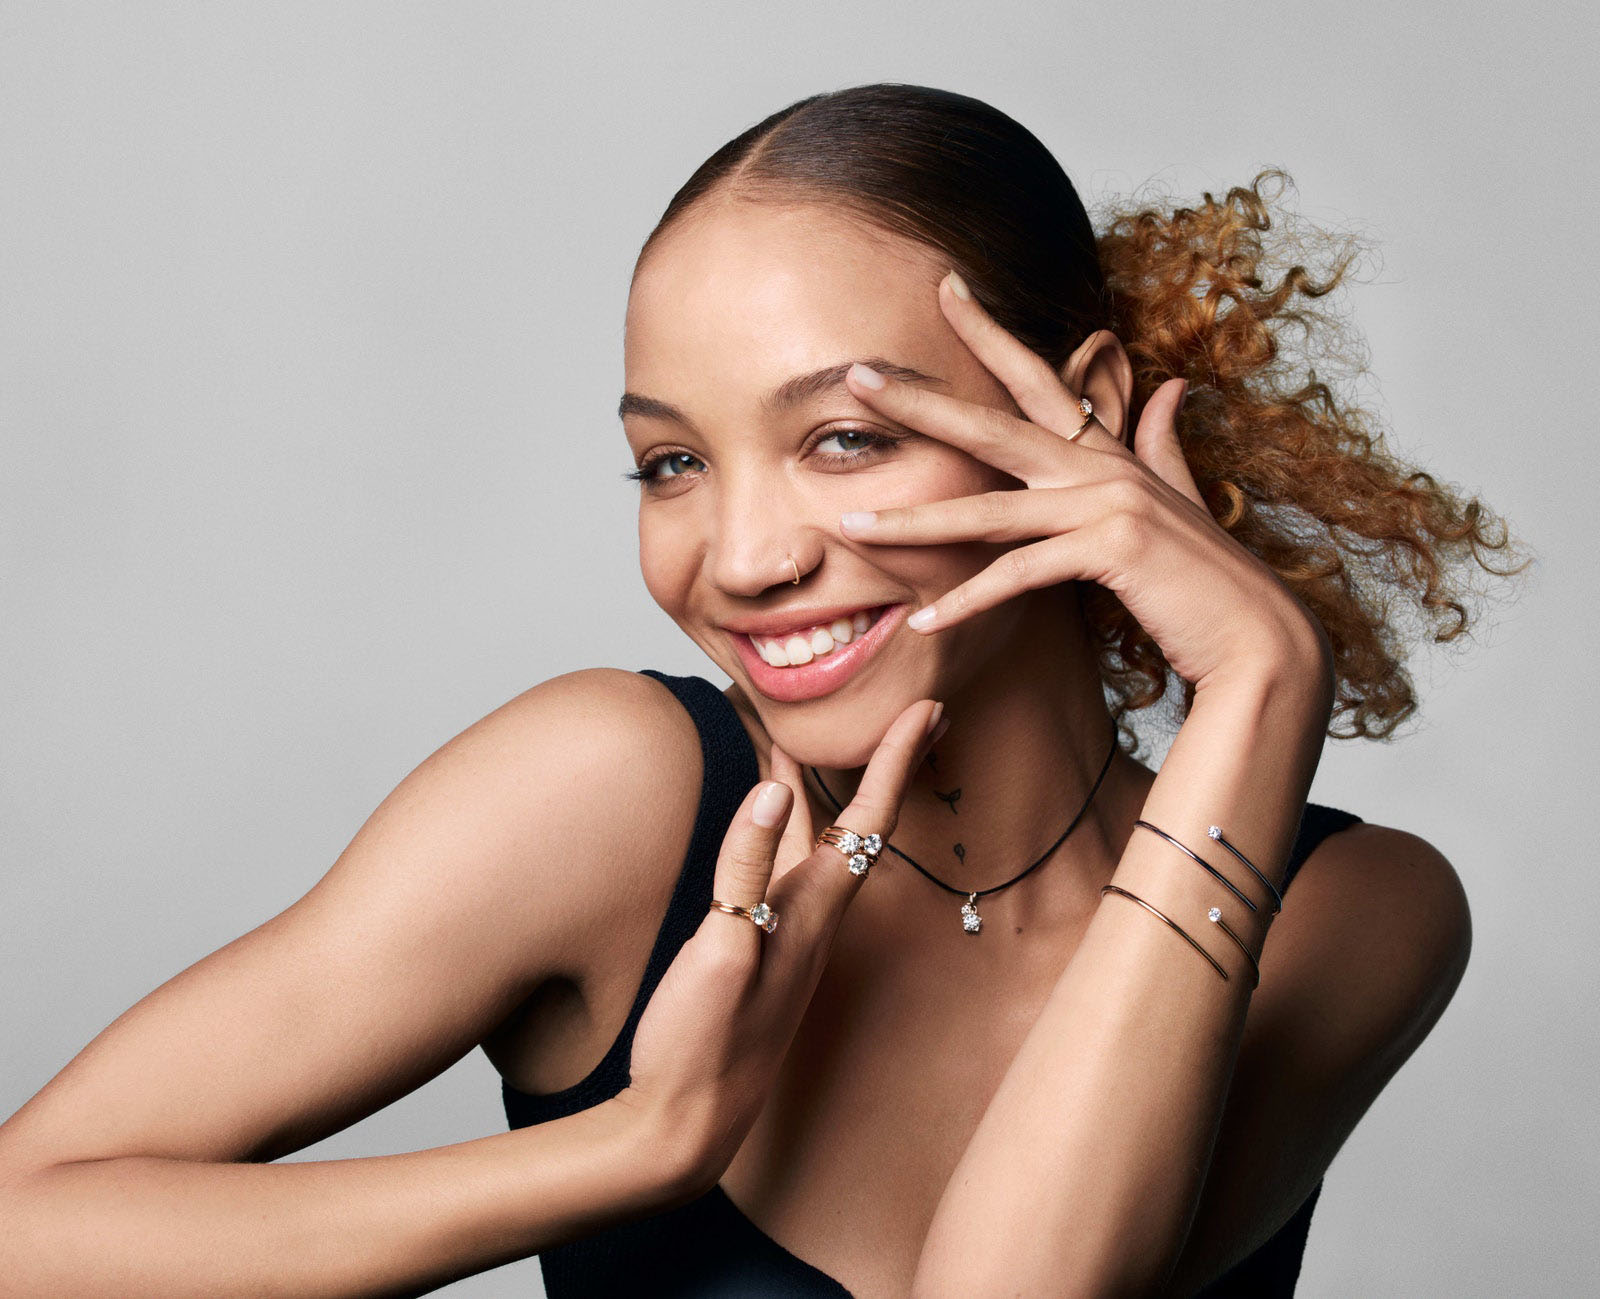 Portrait of a woman with slicked back curly brown hair smiling wearing pandora rings and bracelets as jewelry